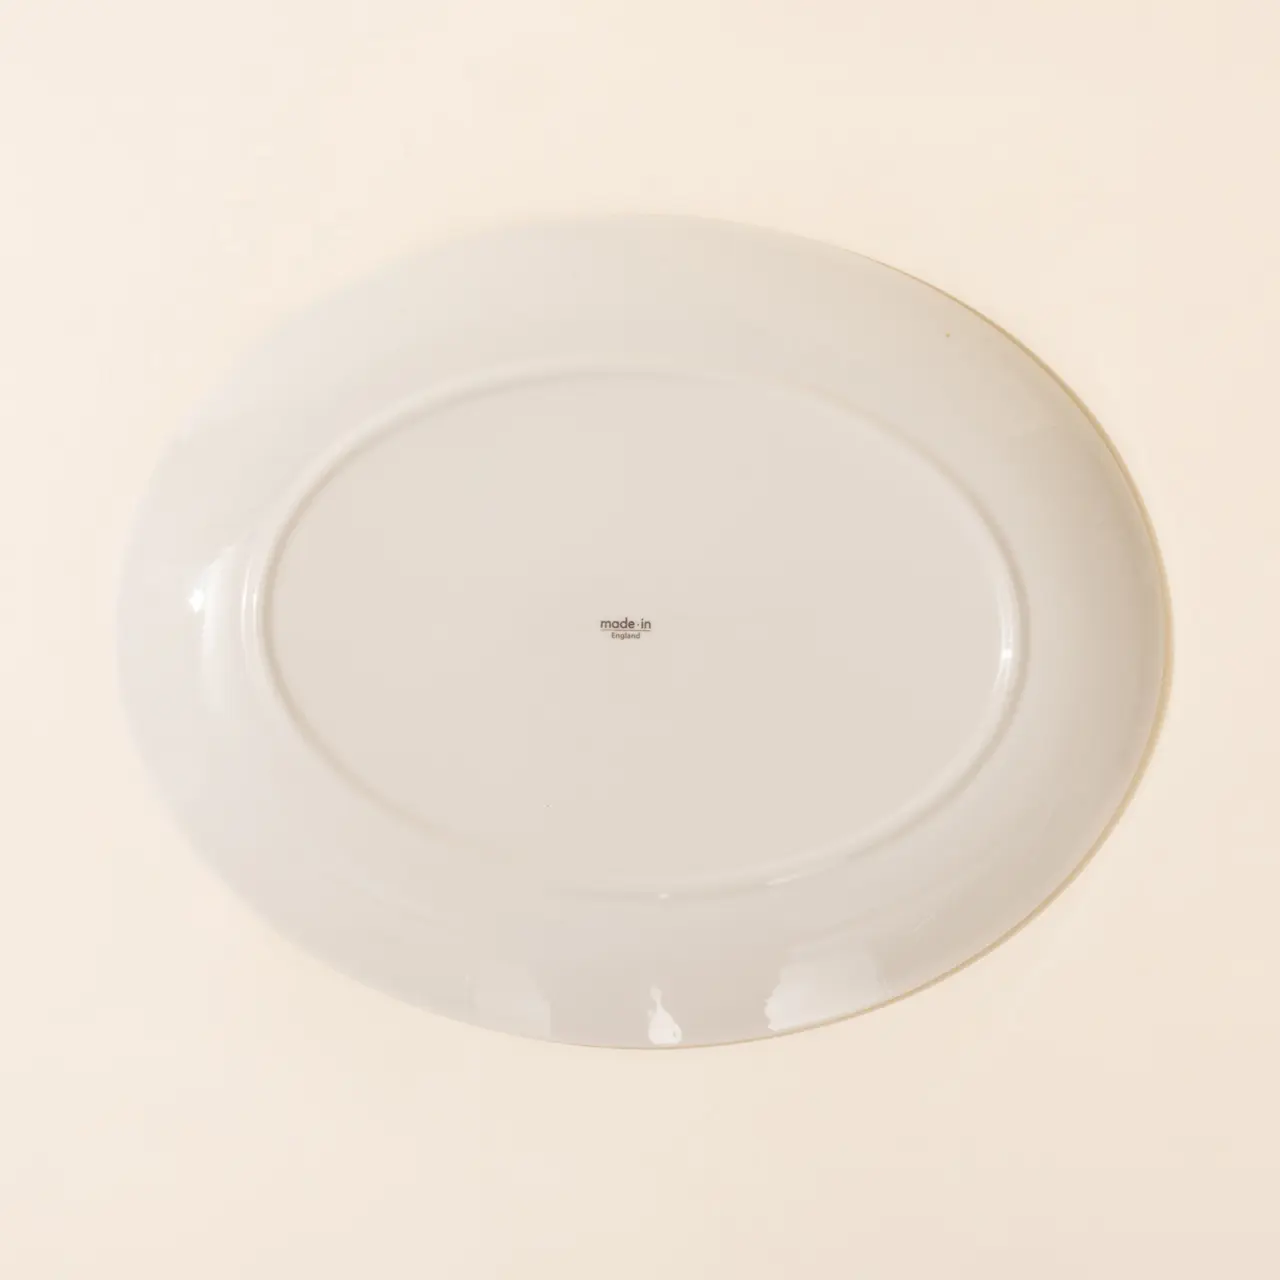 A plain white oval plate is centered on a light backdrop.